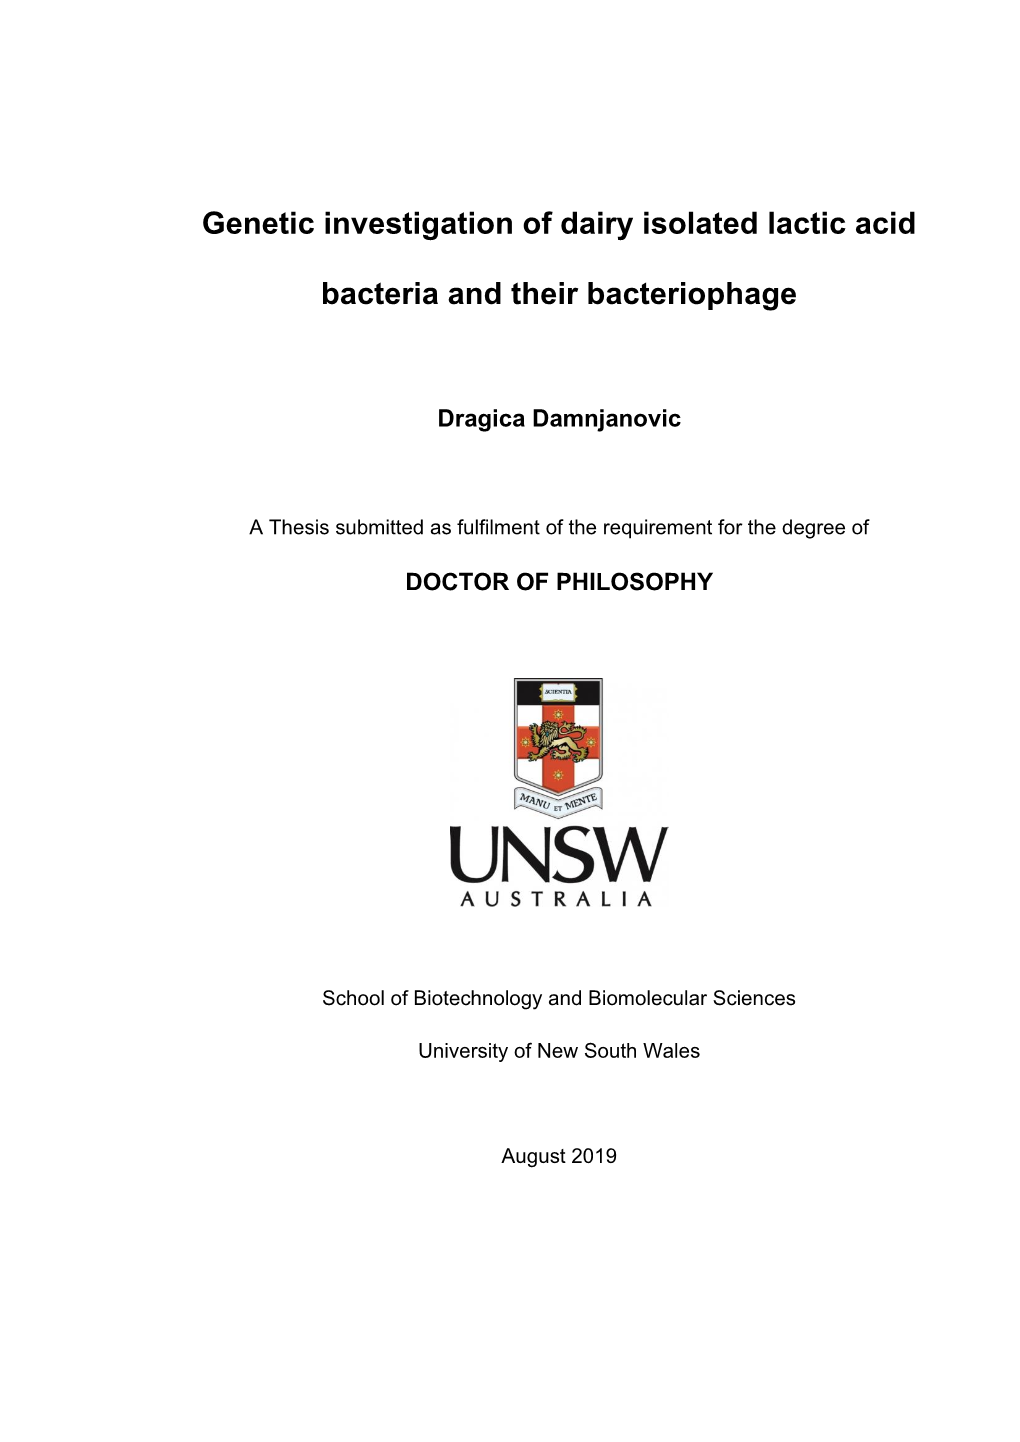 Genetic Investigation of Dairy Isolated Lactic Acid Bacteria and Their